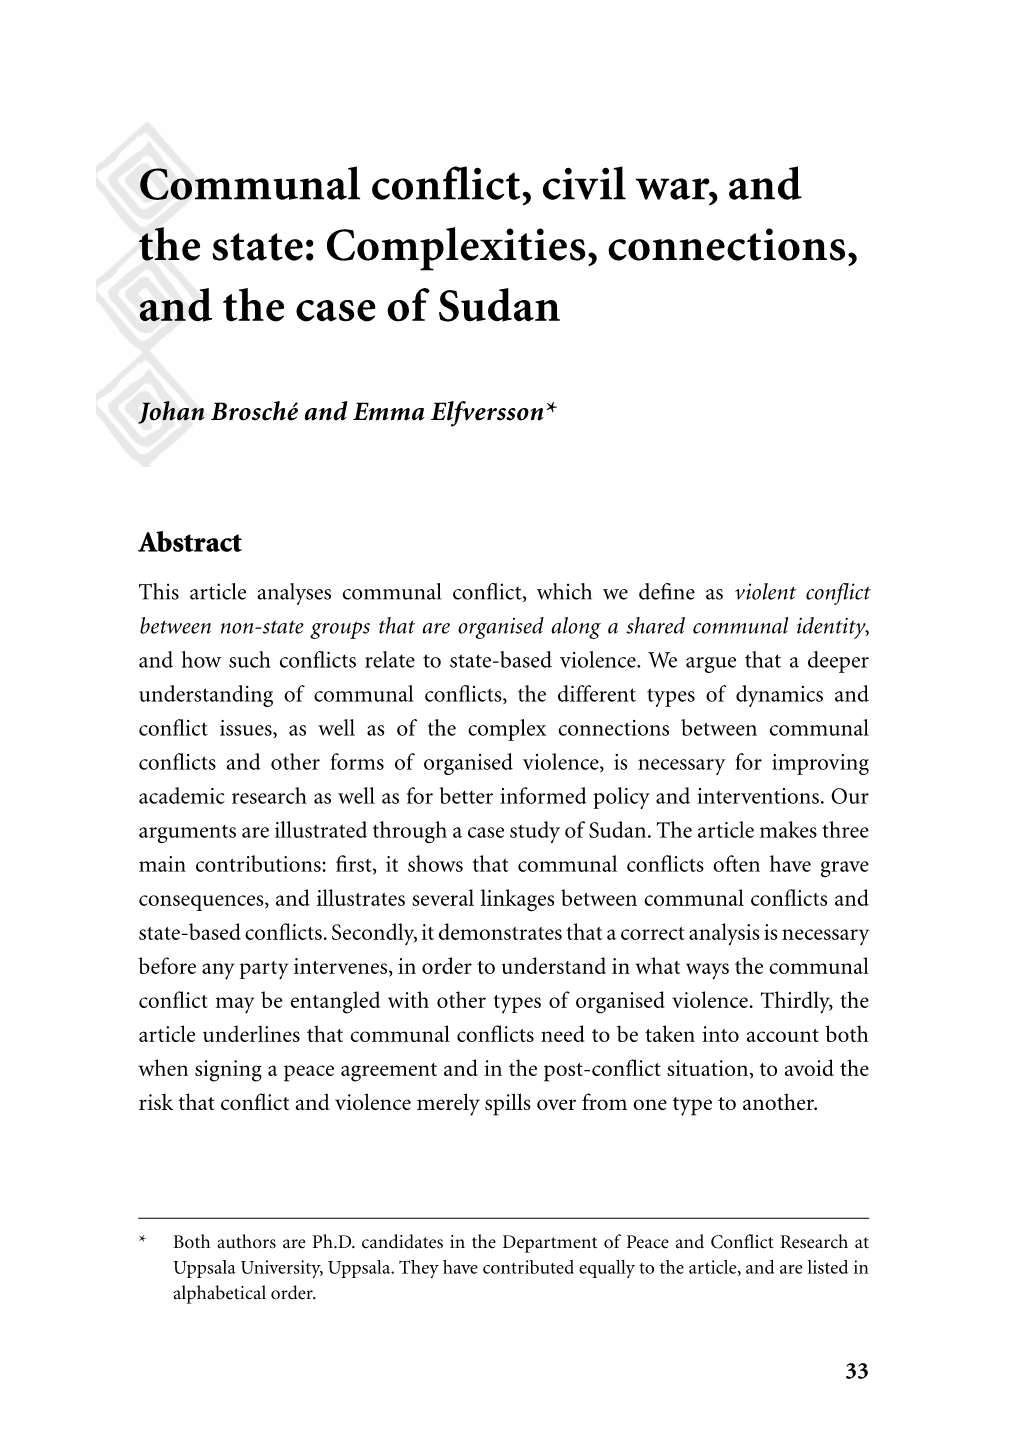 Communal Conflict, Civil War, and the State: Complexities, Connections, and the Case of Sudan